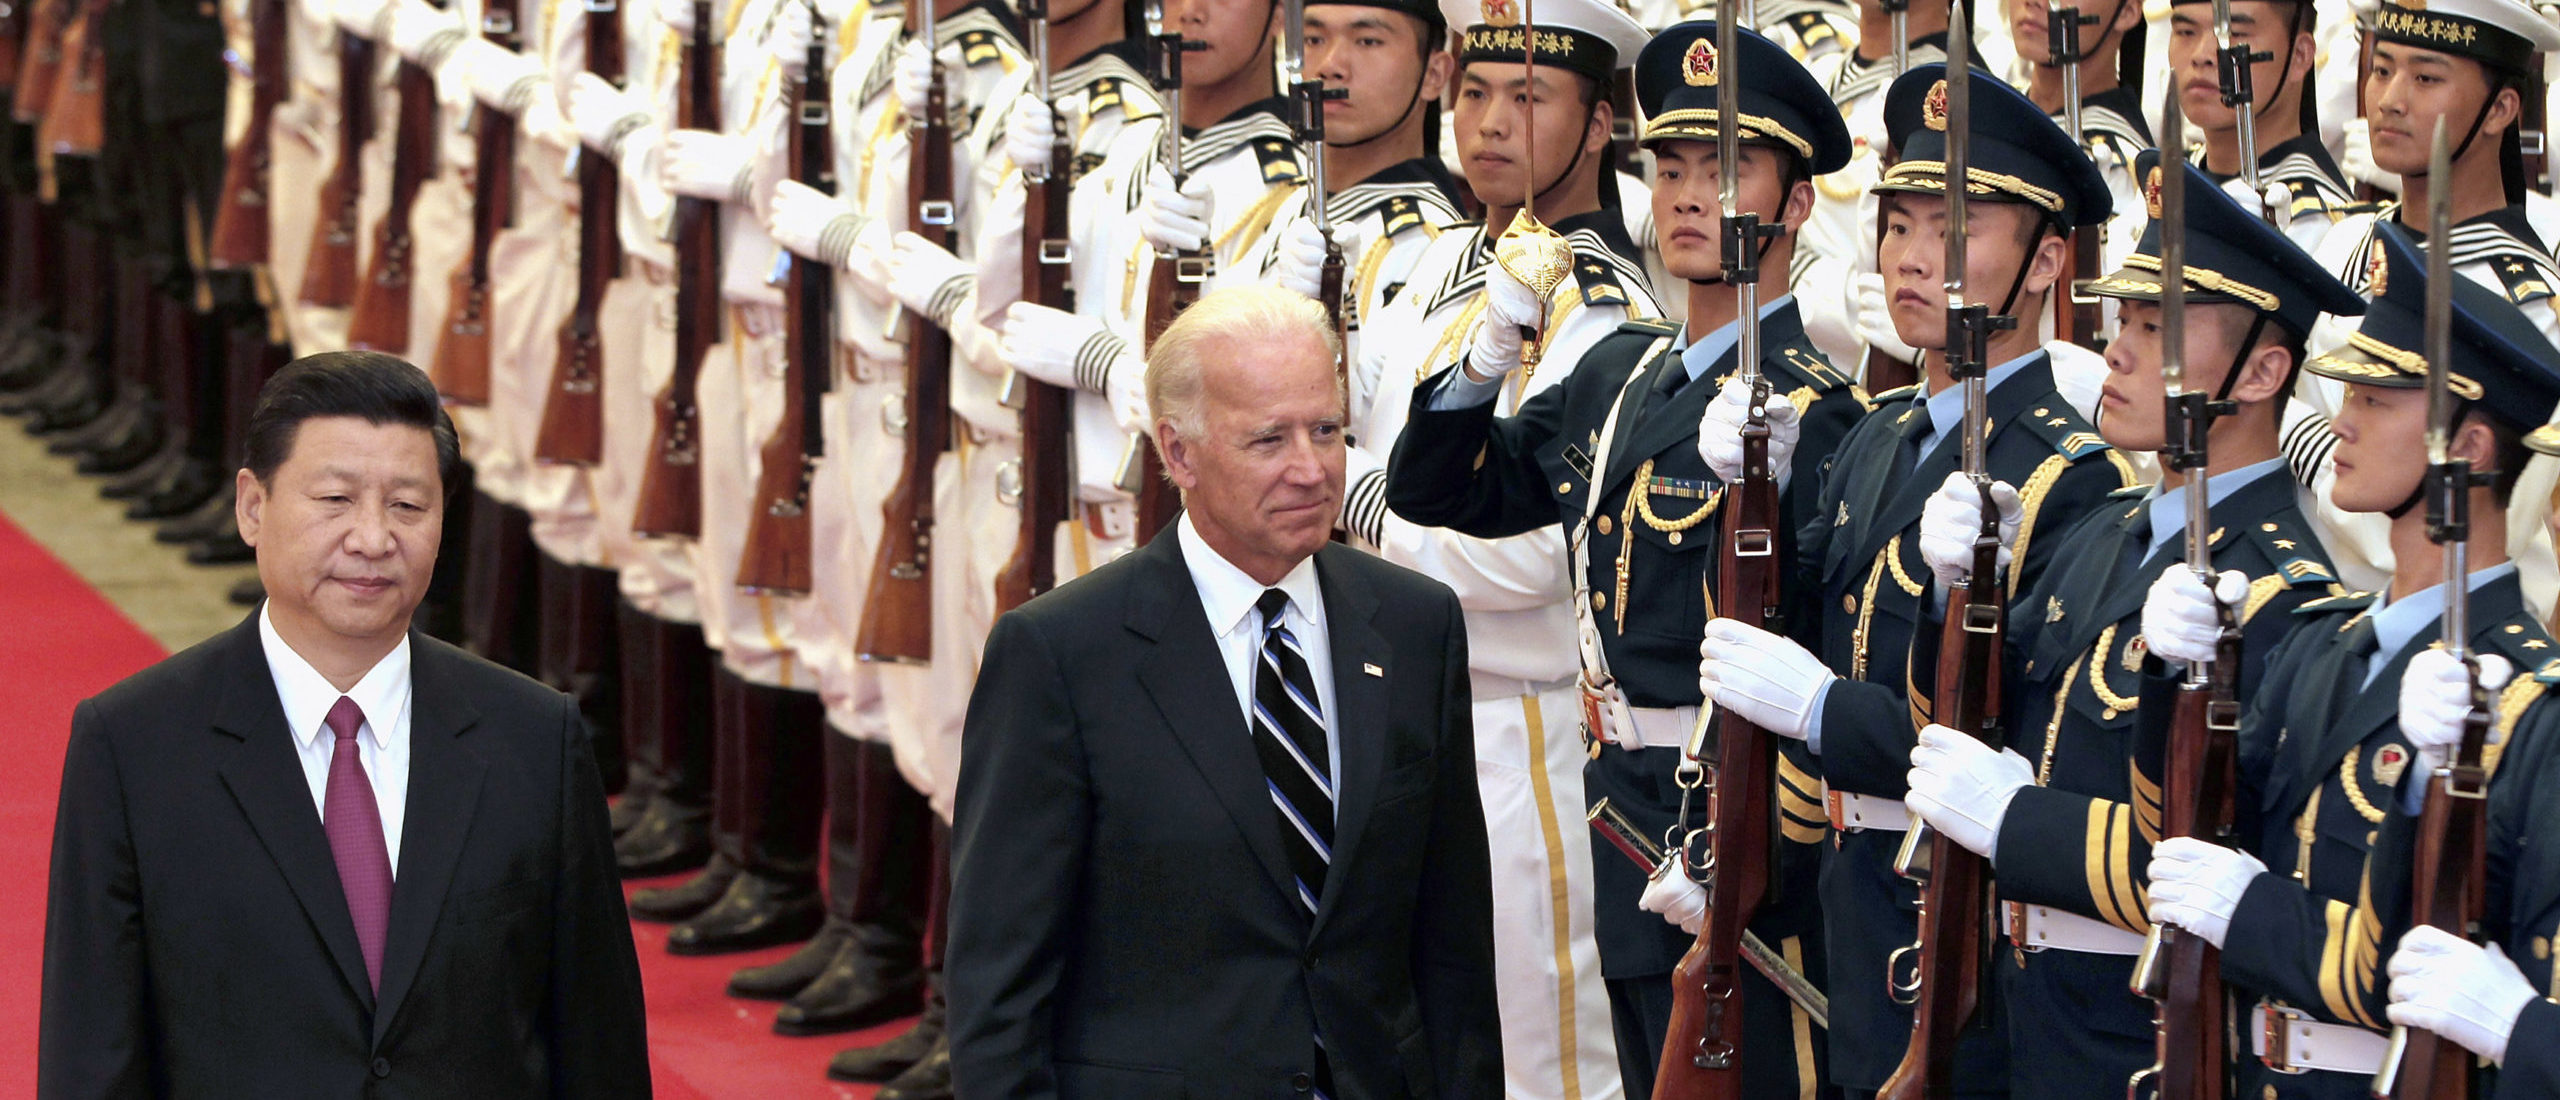 Chinese Vice President Xi Jinping (L) and U.S. Vice President Joe Biden view an honor guard during a welcoming ceremony inside the Great Hall of the People in Beijing August 18, 2011. Biden will visit China, Mongolia and Japan from August 17-25. (REUTERS/Lintao Zhang/Pool)